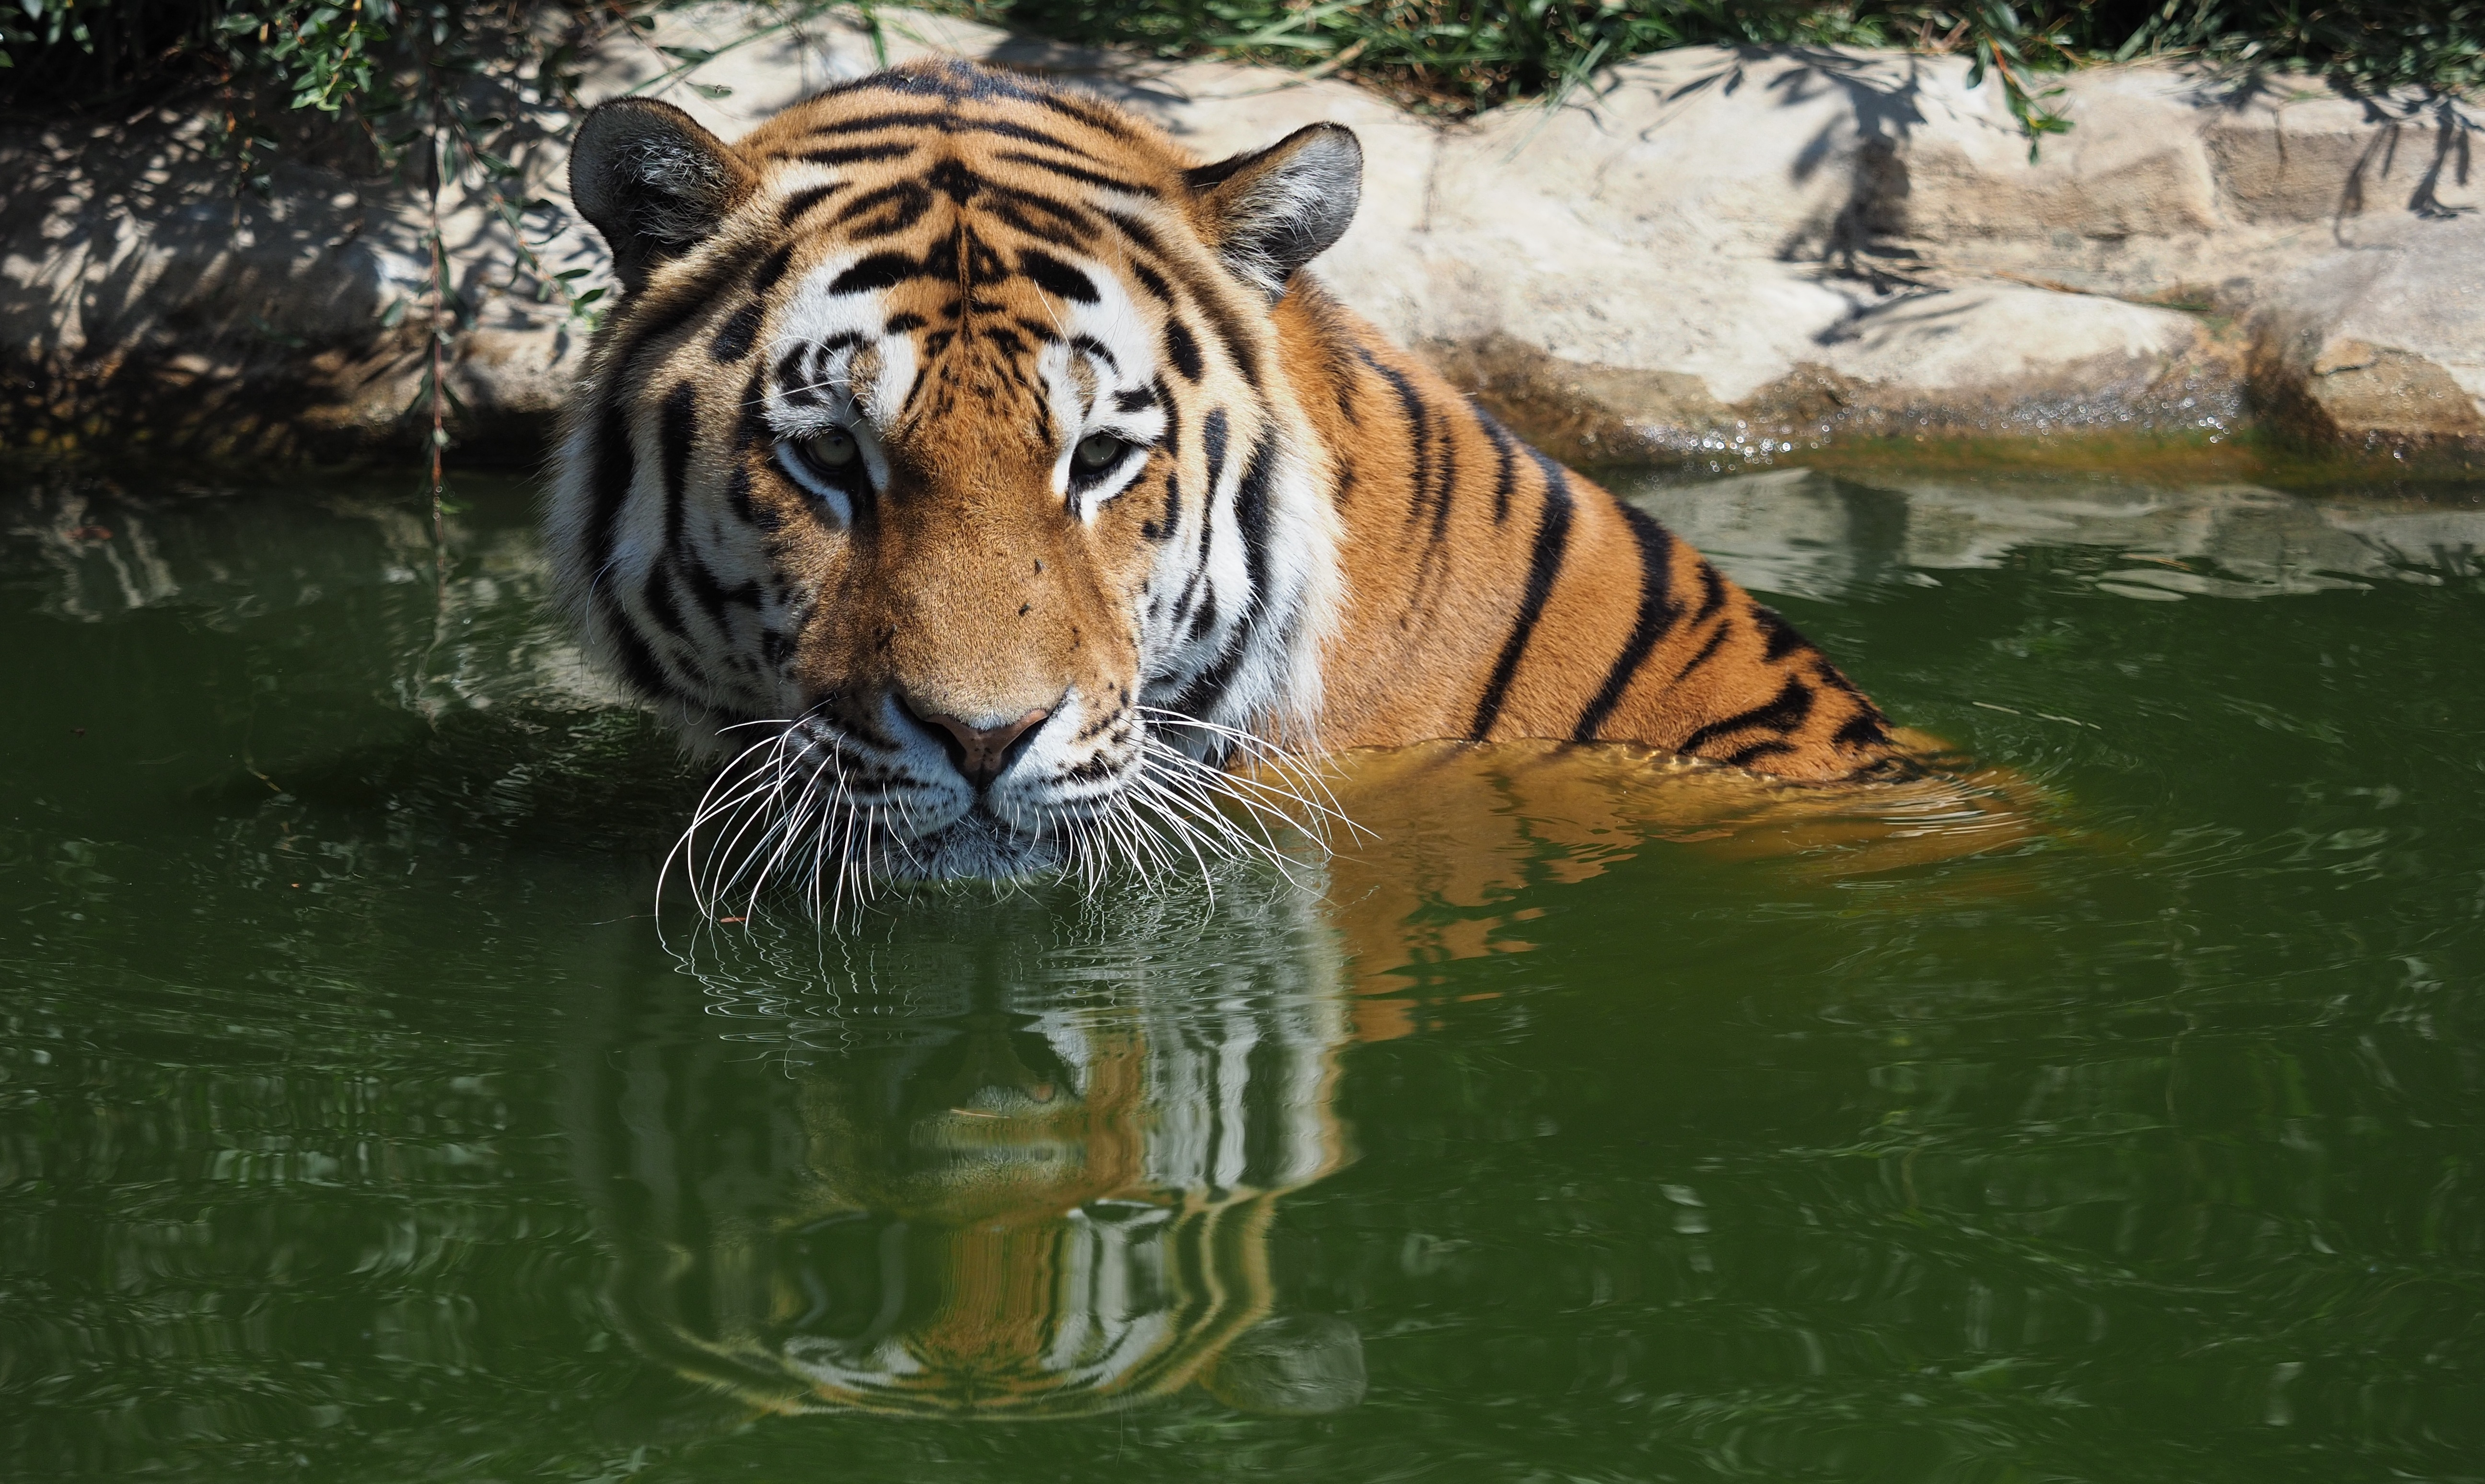 Siberian Tiger Cooling Off by Petr Elvis